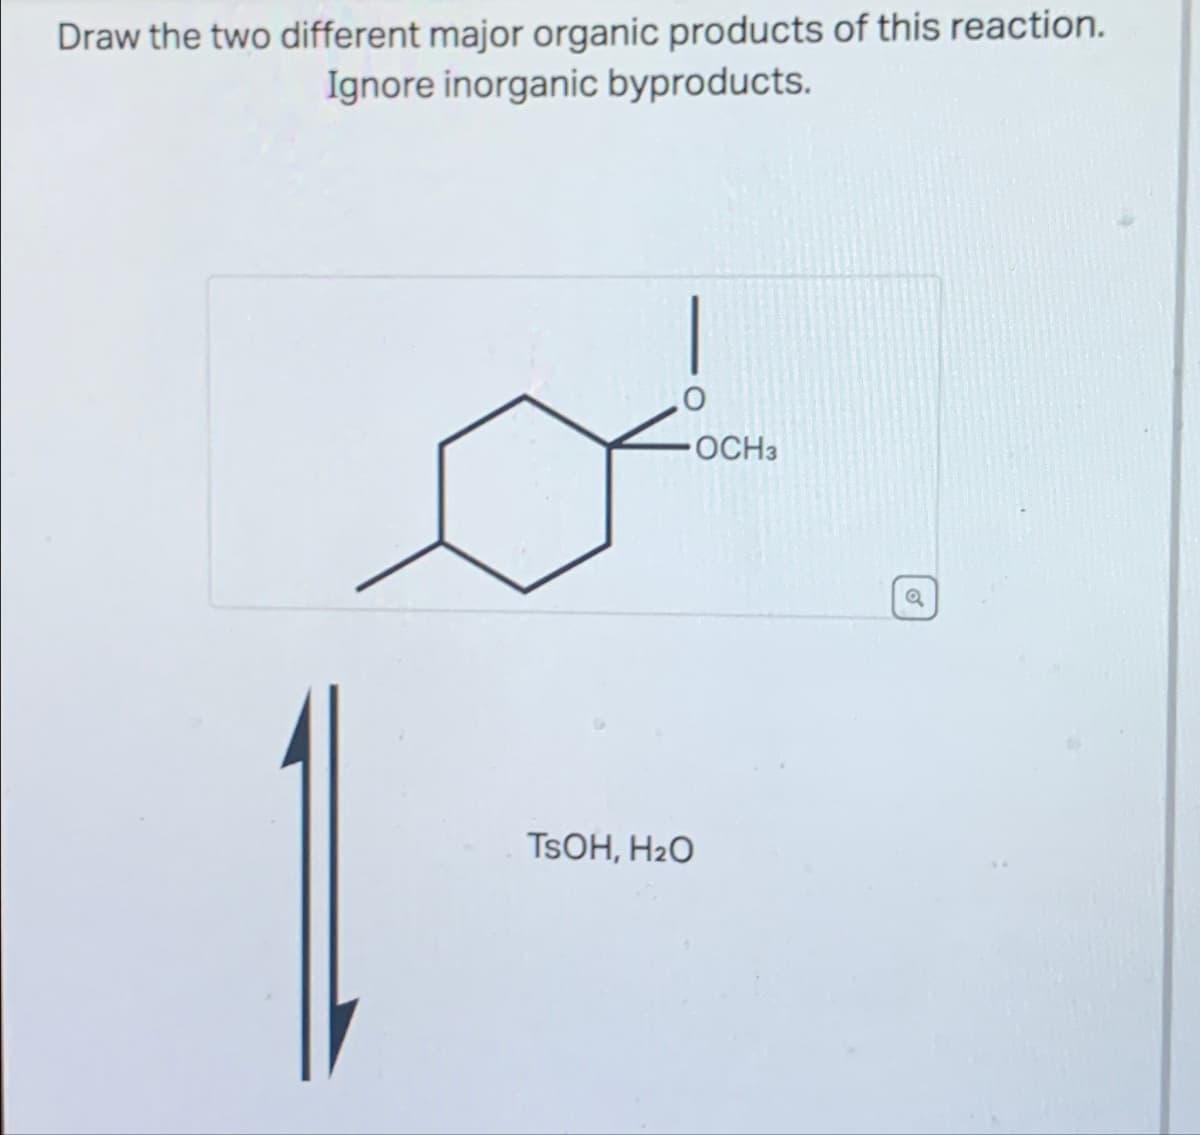 Draw the two different major organic products of this reaction.
Ignore inorganic byproducts.
O
-OCH3
TSOH, H₂O